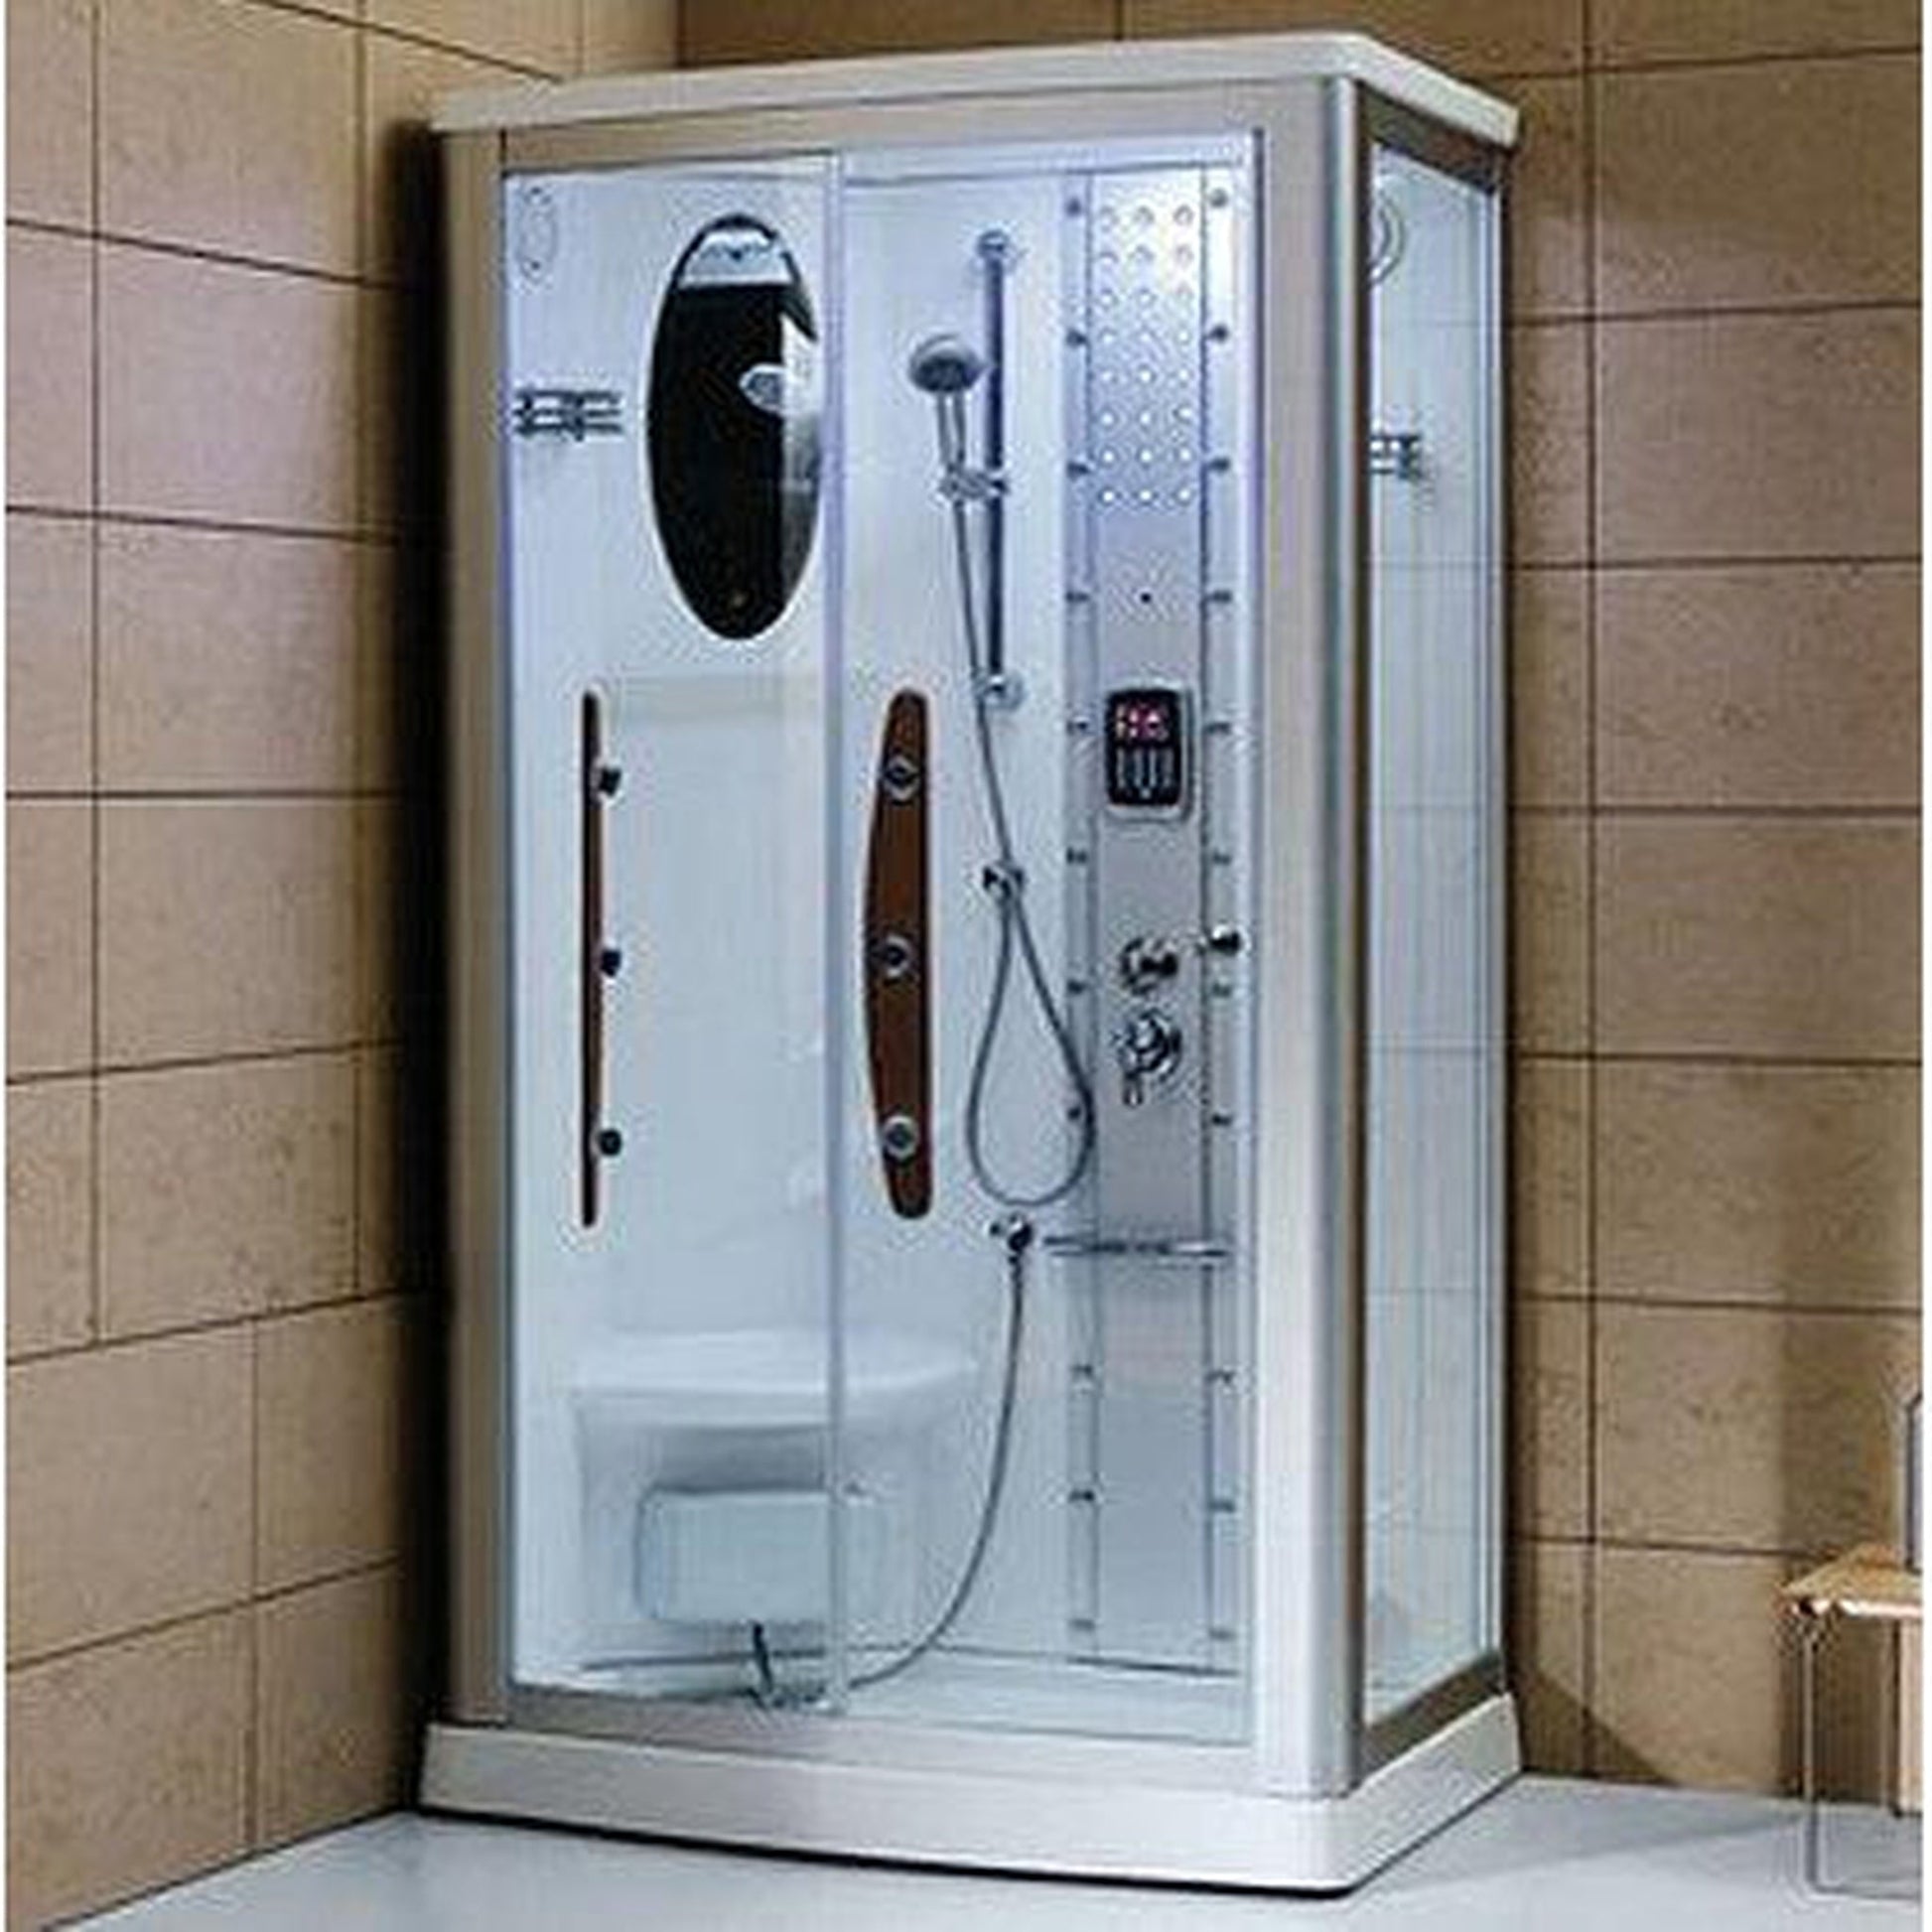 Mesa 45" x 35" x 85" Clear Tempered Glass Freestanding Walk In Clear Steam Shower With Left-Hand Control Panel Configuration, 3kW Steam Generator and 6-Acupuncture Water Body Jets